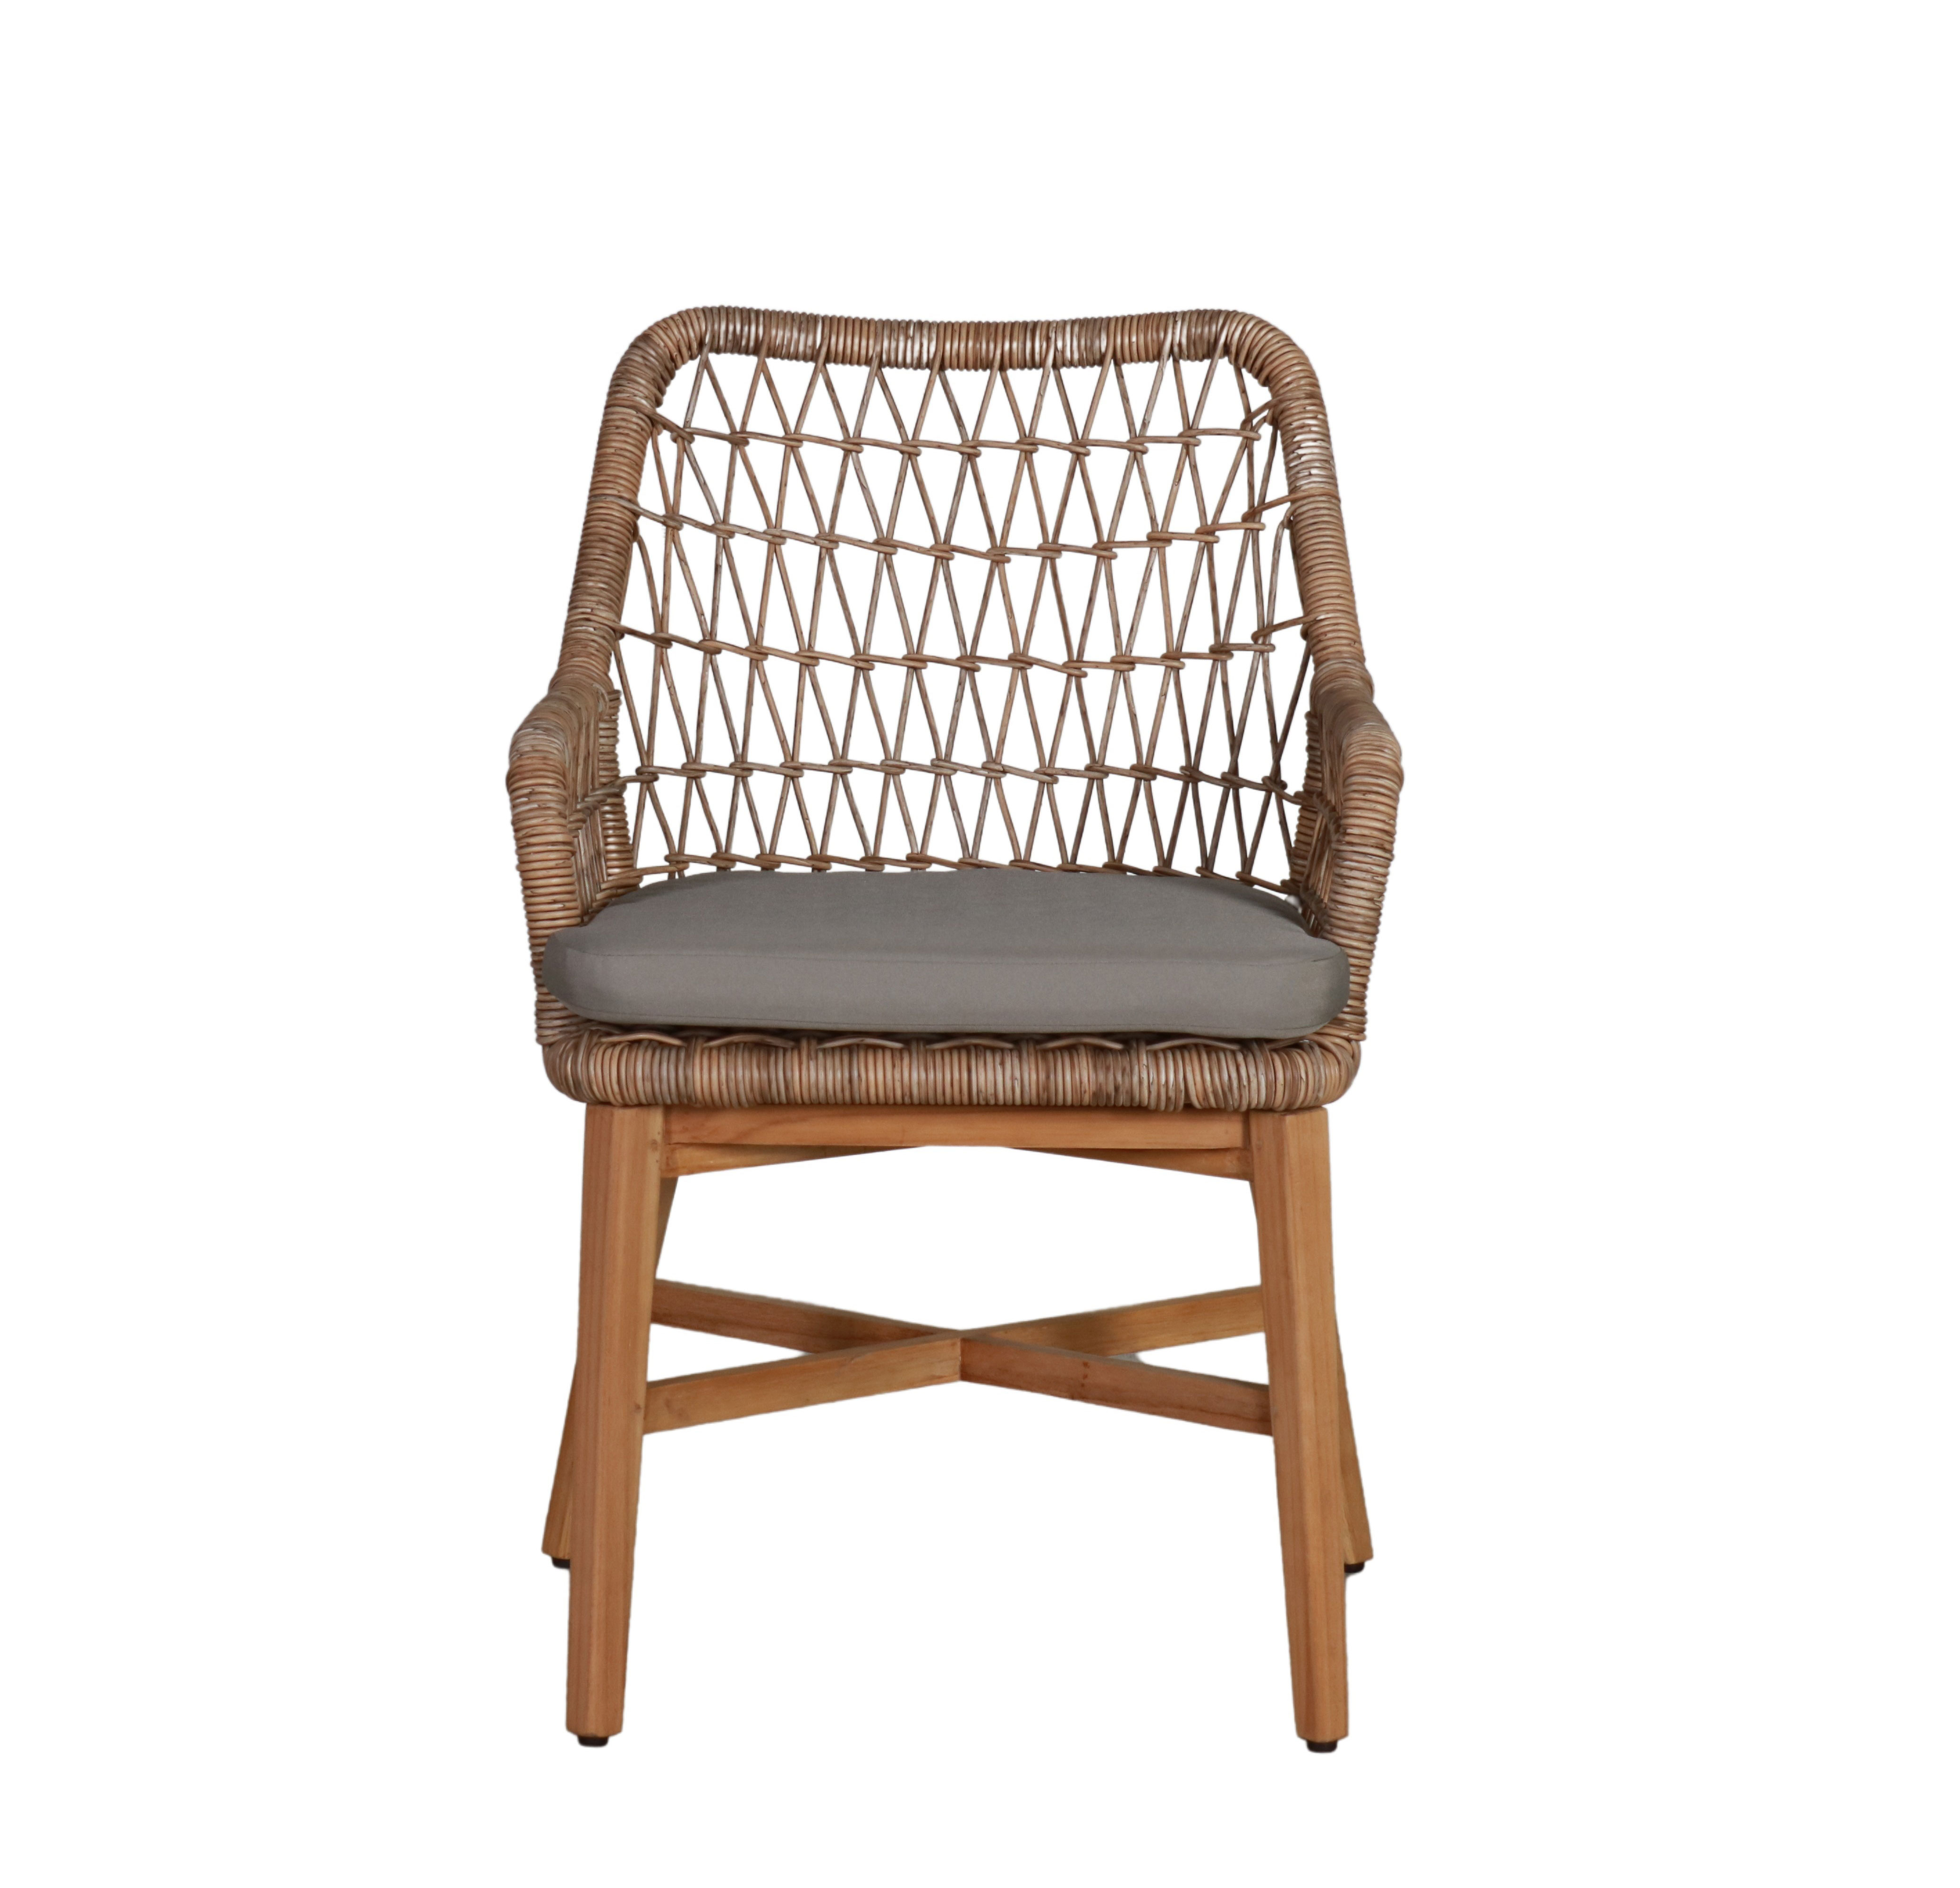 teak and synthetic rattan outdoor armchair with seat cushion